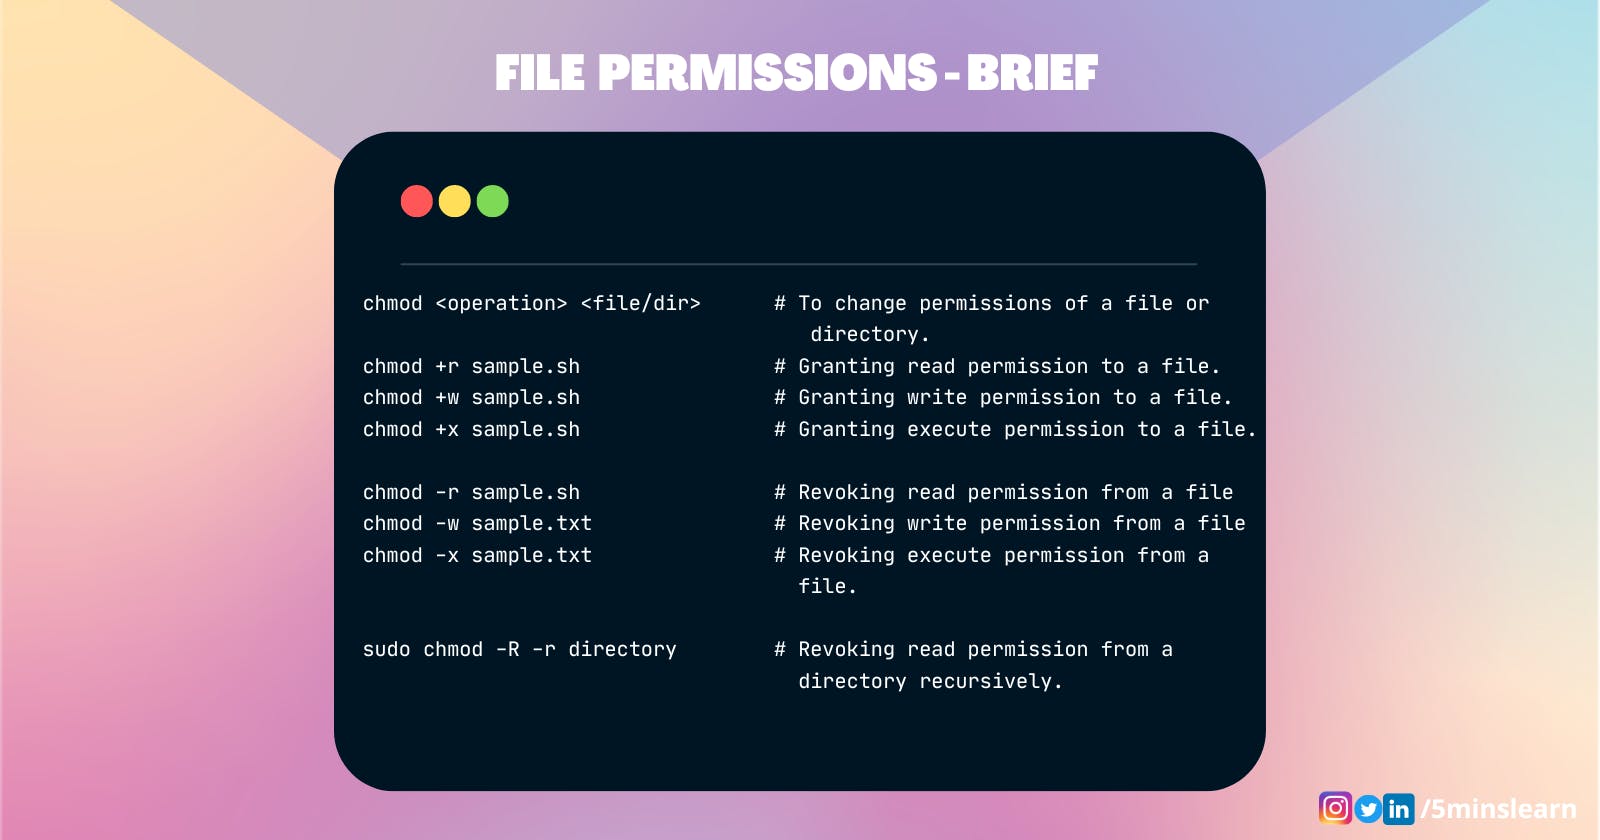 How to play with the permissions of files & directories in Linux as a Beginner?